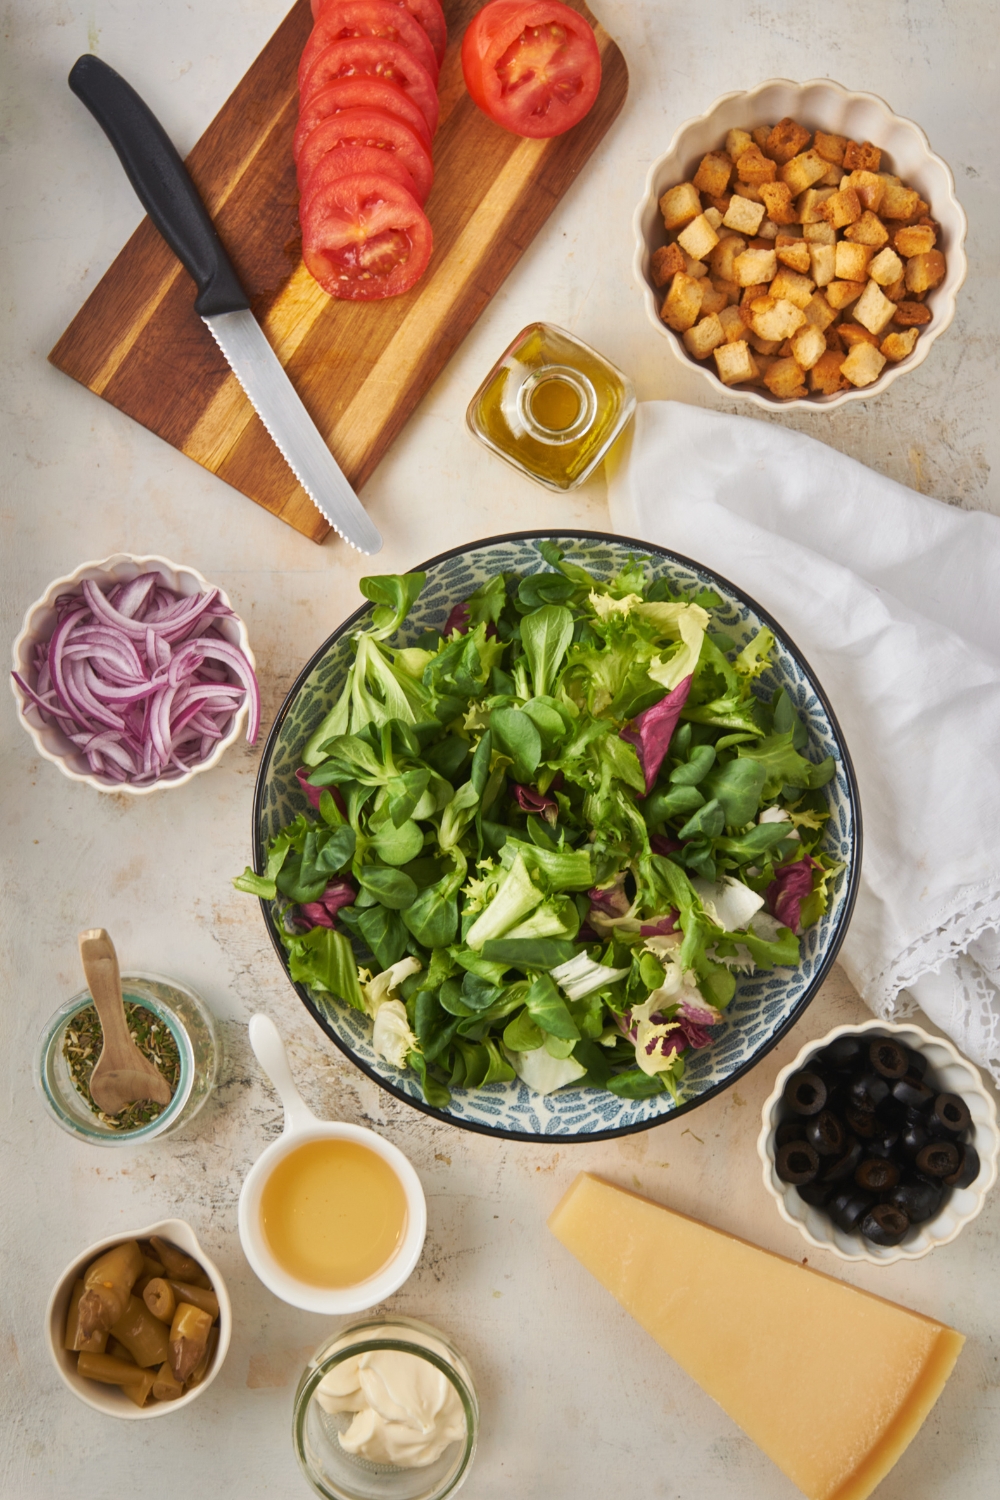 Overhead view of an assortment of ingredients including bowls of lettuce mix, croutons, sliced red onions, black olives, peppers, mayonnaise, a piece of parmesan cheese, sliced tomatoes on a cutting board, and a jar of oil.